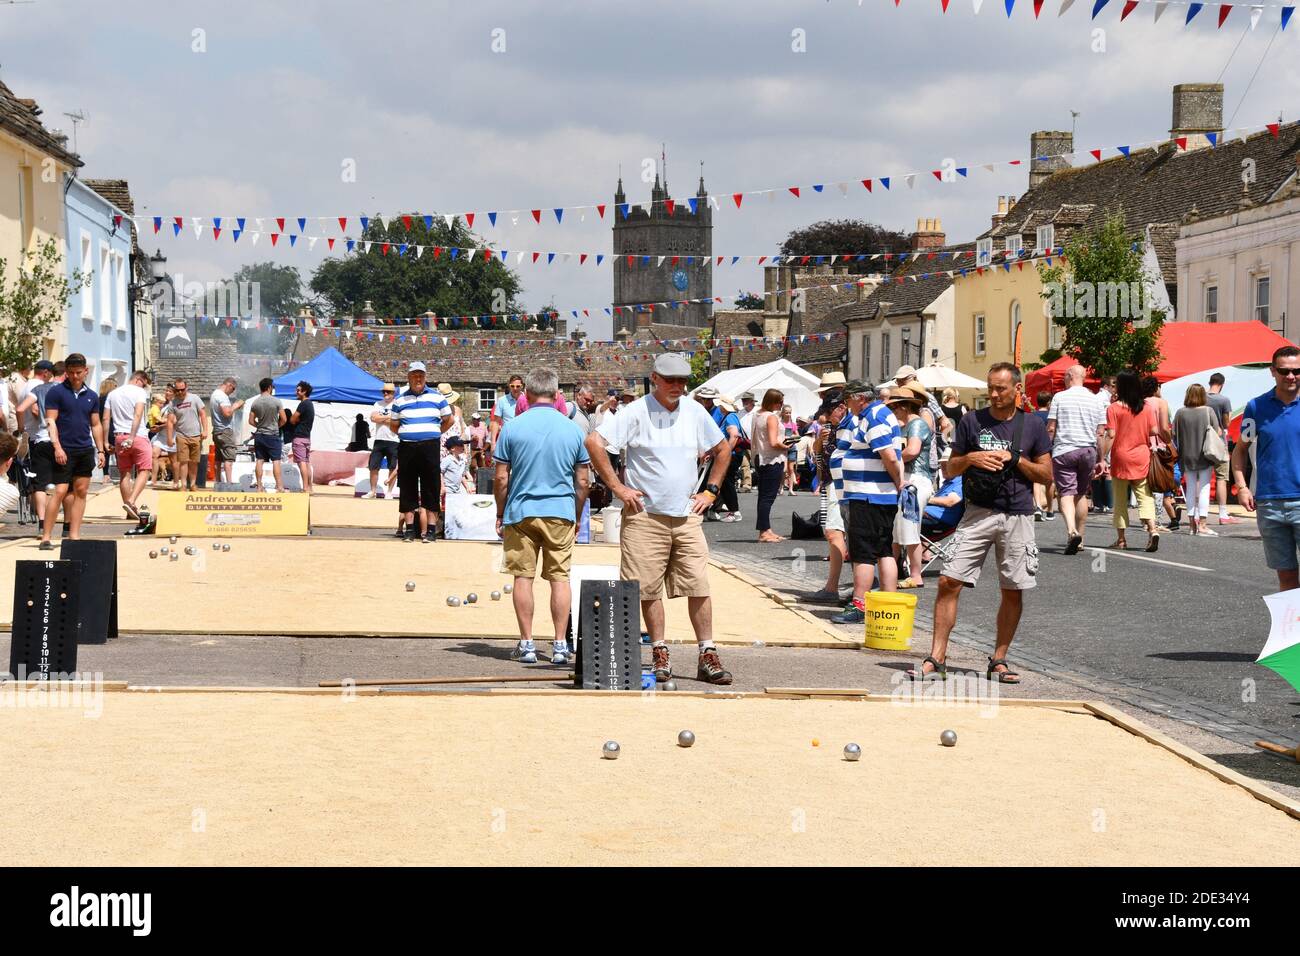 Keen players concentrating hard at the International Boules competition, an annual event held in the wide High street of Sherston,Wiltshire, UK Stock Photo